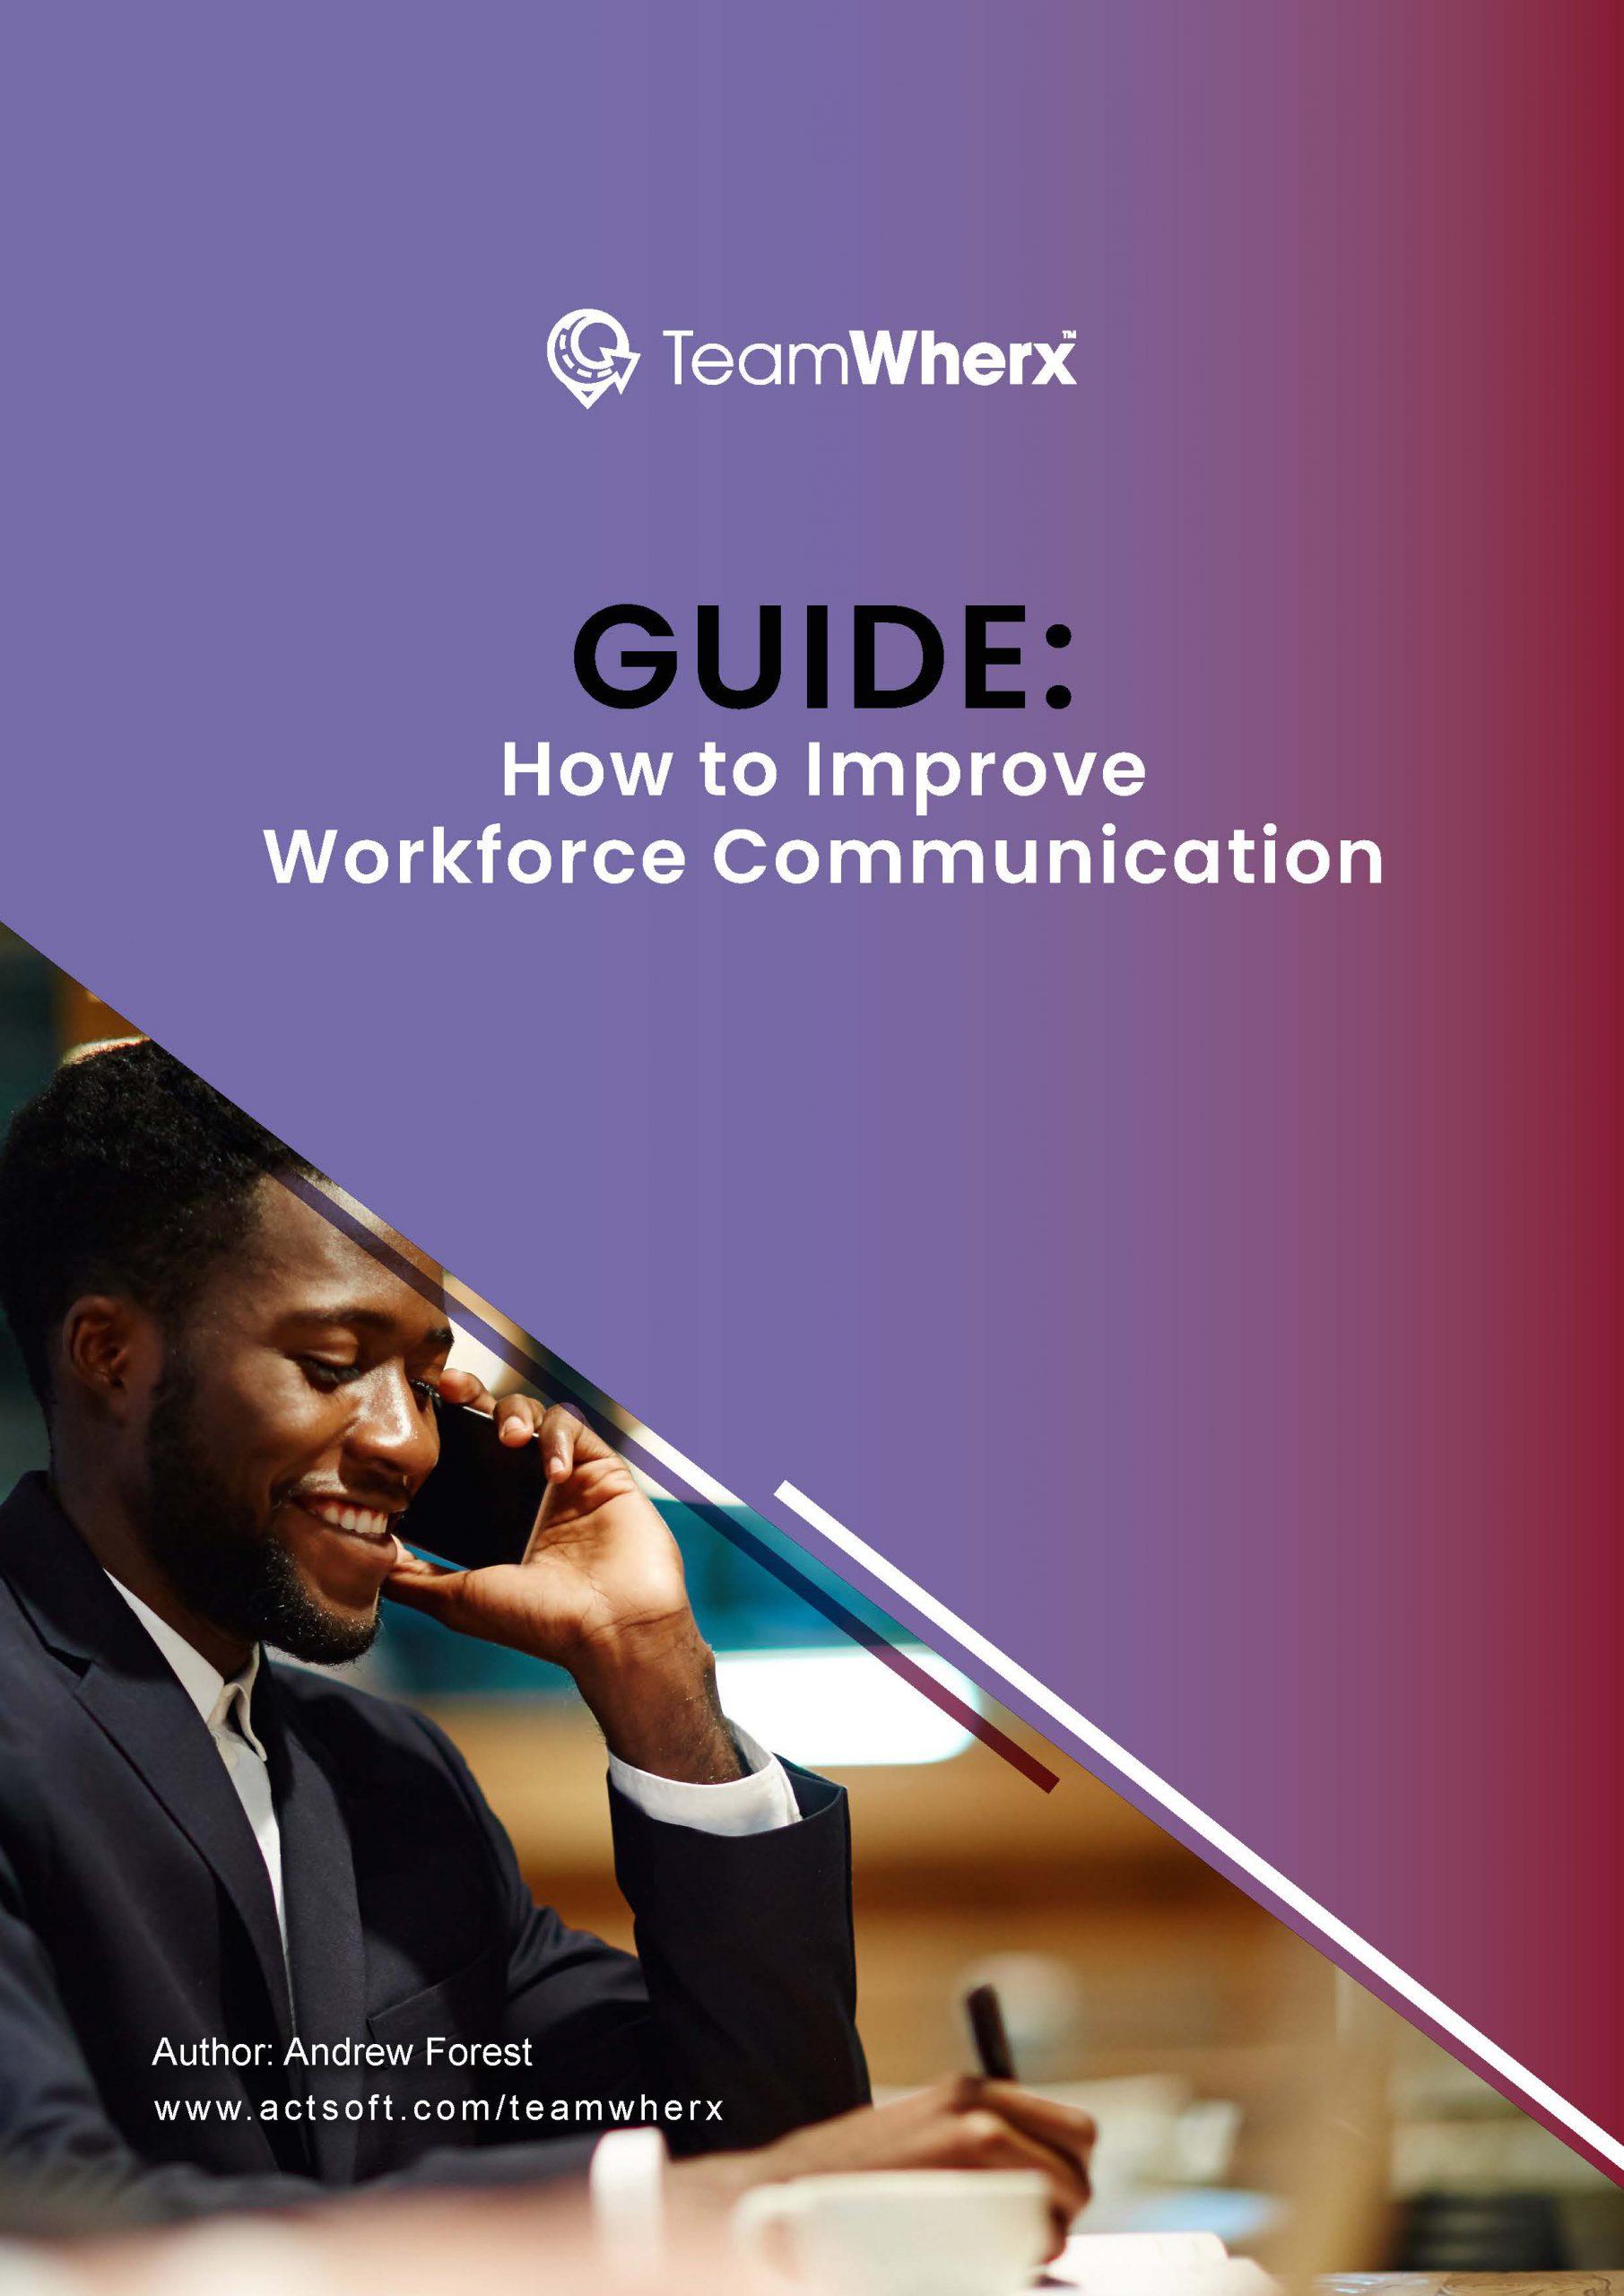 How to Improve Workforce Communication